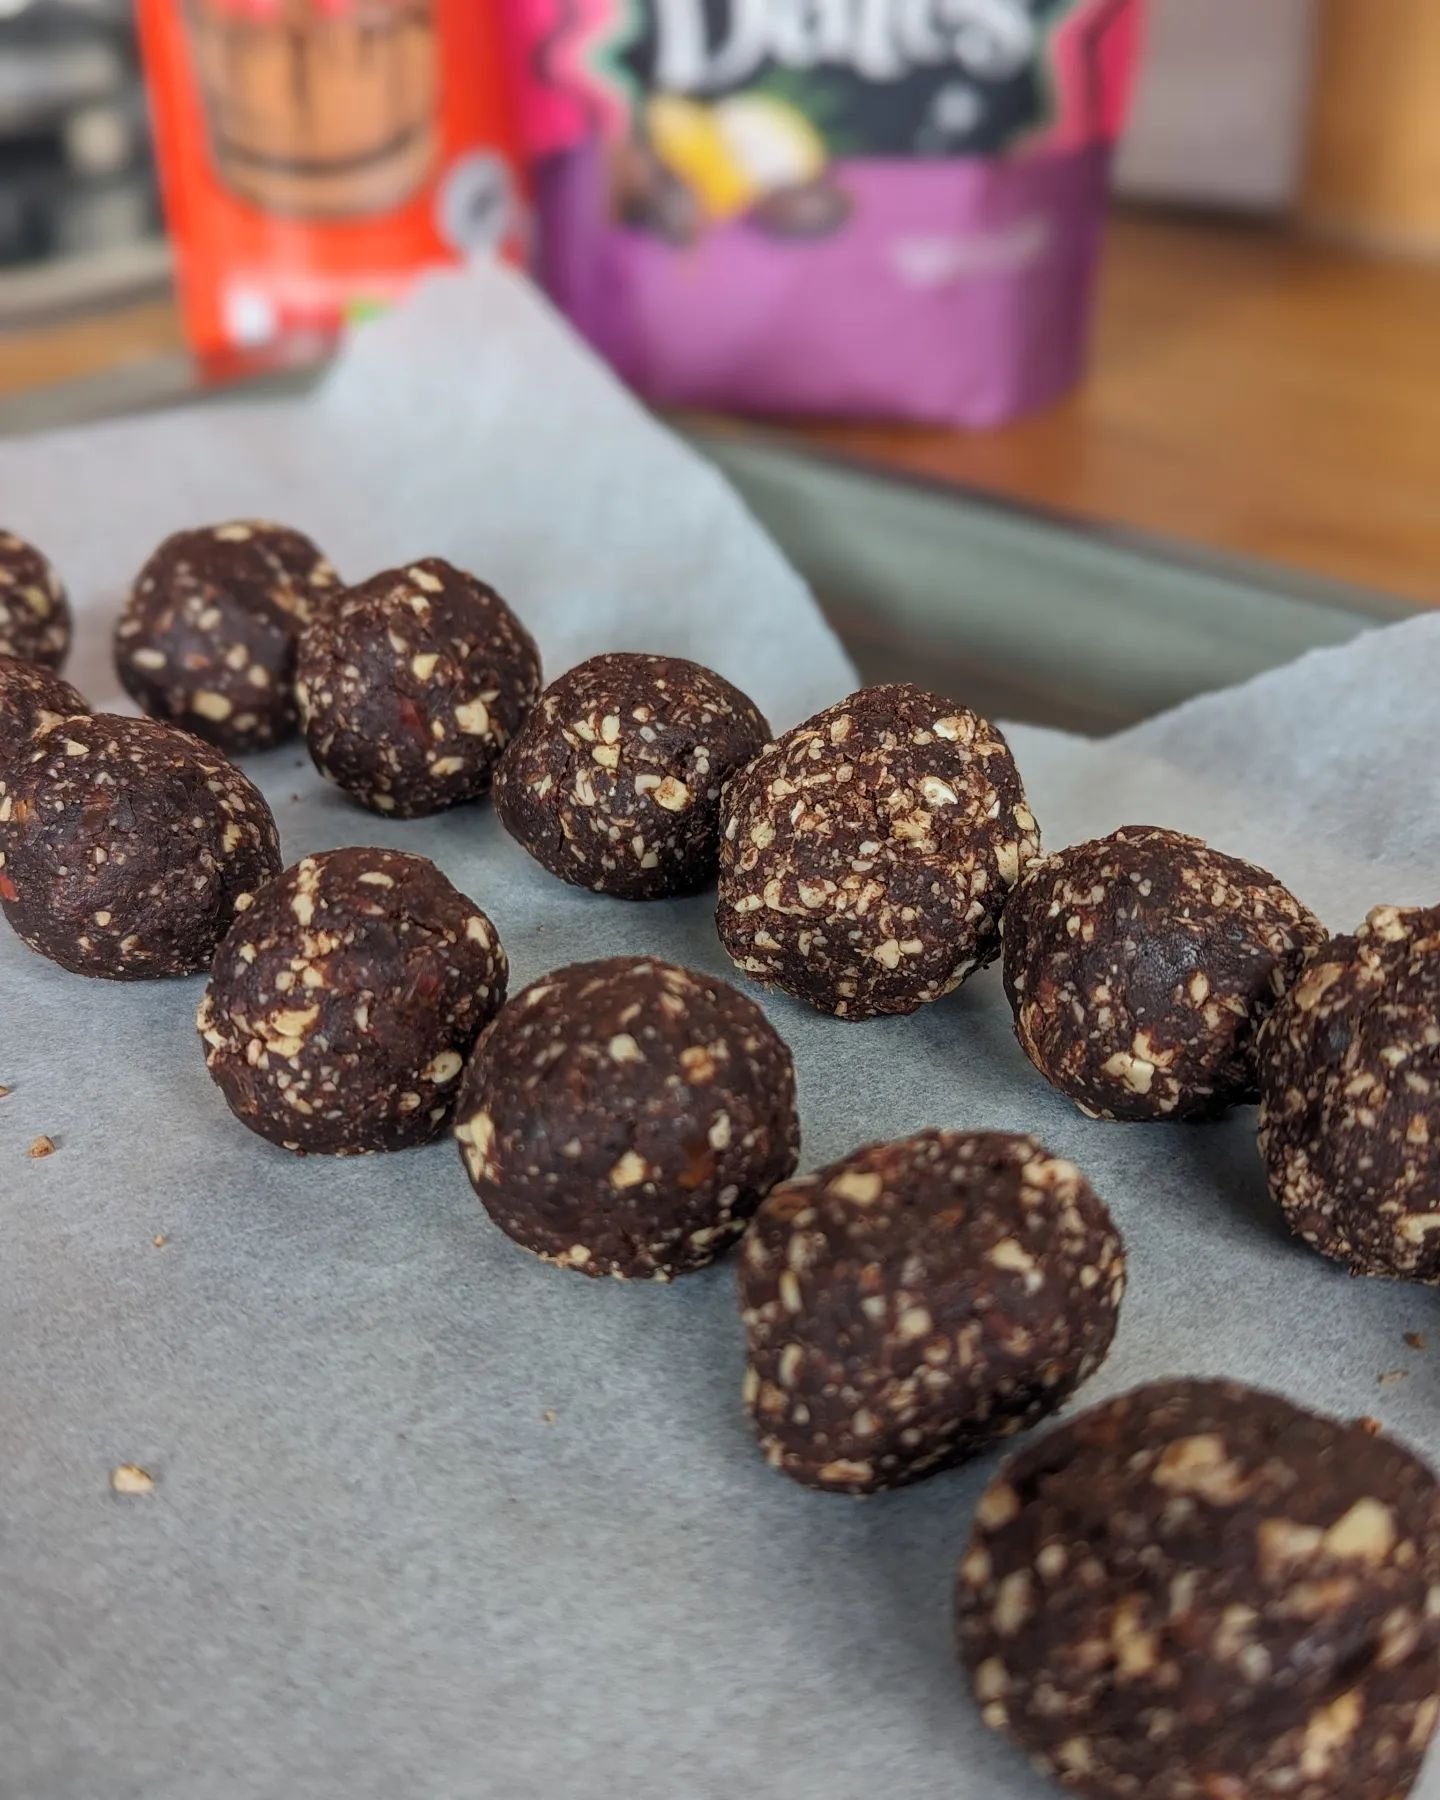 DOULA ON CALL!

I am currently on call this week and quickly made some energy balls to pop in the freezer just in case I get called out. I promise they taste great (coco, dates &amp; cashews) I just didn't't have time to perfect my balls 😂

What hap